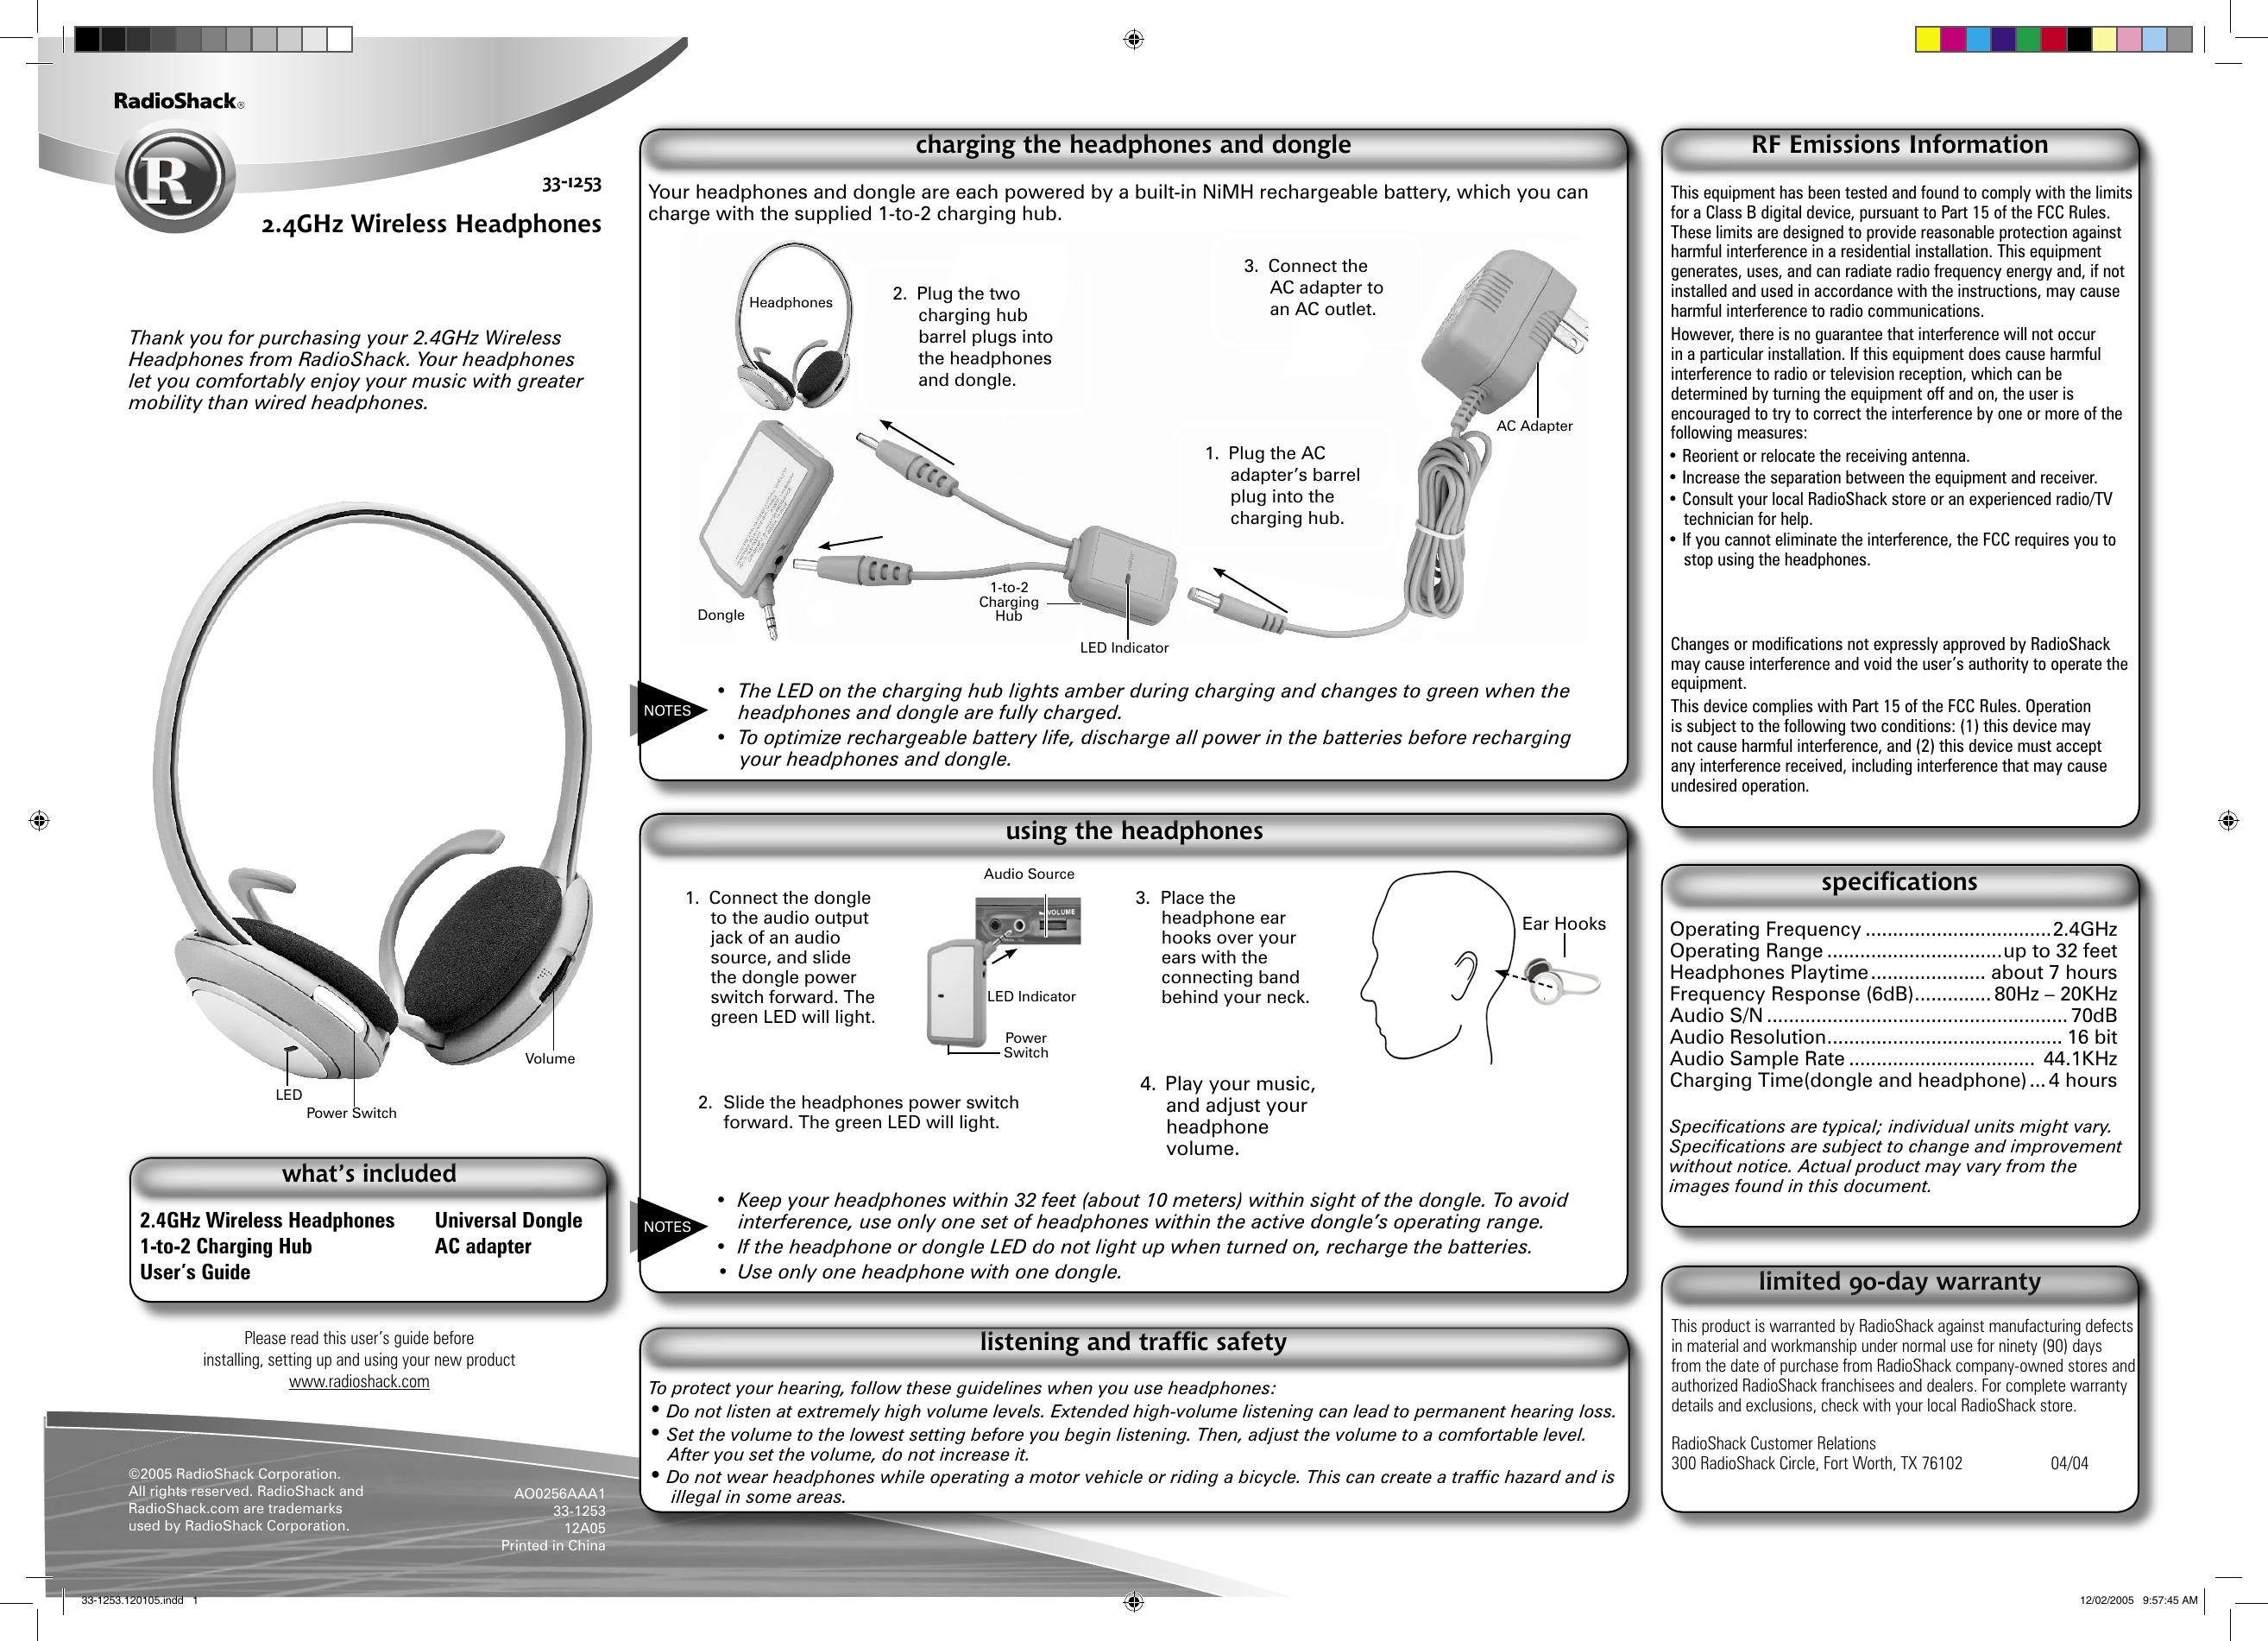 Please read this user’s guide before installing, setting up and using your new productwww.radioshack.com33-12532.4GHz Wireless Headphones Thank you for purchasing your 2.4GHz Wireless Headphones from RadioShack. Your headphones let you comfortably enjoy your music with greater mobility than wired headphones.2.4GHz Wireless Headphones  Universal Dongle1-to-2 Charging Hub  AC adapterUser’s Guidewhat’s included©2005 RadioShack Corporation. All rights reserved. RadioShack and RadioShack.com are trademarks used by RadioShack Corporation.AO0256AAA133-125312A05Printed in ChinaTo protect your hearing, follow these guidelines when you use headphones:• Do not listen at extremely high volume levels. Extended high-volume listening can lead to permanent hearing loss.• Set the volume to the lowest setting before you begin listening. Then, adjust the volume to a comfortable level. After you set the volume, do not increase it.• Do not wear headphones while operating a motor vehicle or riding a bicycle. This can create a trafﬁc hazard and is illegal in some areas.listening and trafﬁc safetyYour headphones and dongle are each powered by a built-in NiMH rechargeable battery, which you can charge with the supplied 1-to-2 charging hub.•  The LED on the charging hub lights amber during charging and changes to green when the headphones and dongle are fully charged.•  To optimize rechargeable battery life, discharge all power in the batteries before recharging your headphones and dongle.charging the headphones and dongle•  Keep your headphones within 32 feet (about 10 meters) within sight of the dongle. To avoid interference, use only one set of headphones within the active dongle’s operating range.•  If the headphone or dongle LED do not light up when turned on, recharge the batteries.•  Use only one headphone with one dongle.using the headphonesOperating Frequency ..................................2.4GHzOperating Range ................................up to 32 feetHeadphones Playtime ..................... about 7 hoursFrequency Response (6dB) .............. 80Hz – 20KHzAudio S/N ....................................................... 70dBAudio Resolution ........................................... 16 bitAudio Sample Rate ..................................  44.1KHzCharging Time(dongle and headphone) ... 4 hoursSpeciﬁcations are typical; individual units might vary. Speciﬁcations are subject to change and improvement without notice. Actual product may vary from the images found in this document.speciﬁcationsThis equipment has been tested and found to comply with the limits for a Class B digital device, pursuant to Part 15 of the FCC Rules. These limits are designed to provide reasonable protection against harmful interference in a residential installation. This equipment generates, uses, and can radiate radio frequency energy and, if not installed and used in accordance with the instructions, may cause harmful interference to radio communications. However, there is no guarantee that interference will not occur in a particular installation. If this equipment does cause harmful interference to radio or television reception, which can be determined by turning the equipment off and on, the user is encouraged to try to correct the interference by one or more of the following measures:• Reorient or relocate the receiving antenna.• Increase the separation between the equipment and receiver. • Consult your local RadioShack store or an experienced radio/TV technician for help.• If you cannot eliminate the interference, the FCC requires you to stop using the headphones.Changes or modiﬁcations not expressly approved by RadioShack may cause interference and void the user’s authority to operate the equipment.This device complies with Part 15 of the FCC Rules. Operation is subject to the following two conditions: (1) this device may not cause harmful interference, and (2) this device must accept any interference received, including interference that may cause undesired operation.RF Emissions InformationThis product is warranted by RadioShack against manufacturing defects in material and workmanship under normal use for ninety (90) days from the date of purchase from RadioShack company-owned stores and authorized RadioShack franchisees and dealers. For complete warranty details and exclusions, check with your local RadioShack store.RadioShack Customer Relations300 RadioShack Circle, Fort Worth, TX 76102     04/04limited 90-day warrantyPower Switch LEDNOTESNOTESVolumeHeadphonesLED IndicatorDongle1-to-2 Charging HubAC Adapter1.  Plug the AC adapter’s barrel plug into the charging hub.2.  Plug the two charging hub barrel plugs into the headphones and dongle.3.  Connect the AC adapter to an AC outlet.1.  Connect the dongle to the audio output jack of an audio source, and slide the dongle power switch forward. The green LED will light.2.  Slide the headphones power switch forward. The green LED will light.3.  Place the headphone ear hooks over your ears with the connecting band behind your neck.4.  Play your music, and adjust your headphone volume.Audio SourceLED IndicatorPower Switch Ear Hooks33-1253.120105.indd   1 12/02/2005   9:57:45 AM